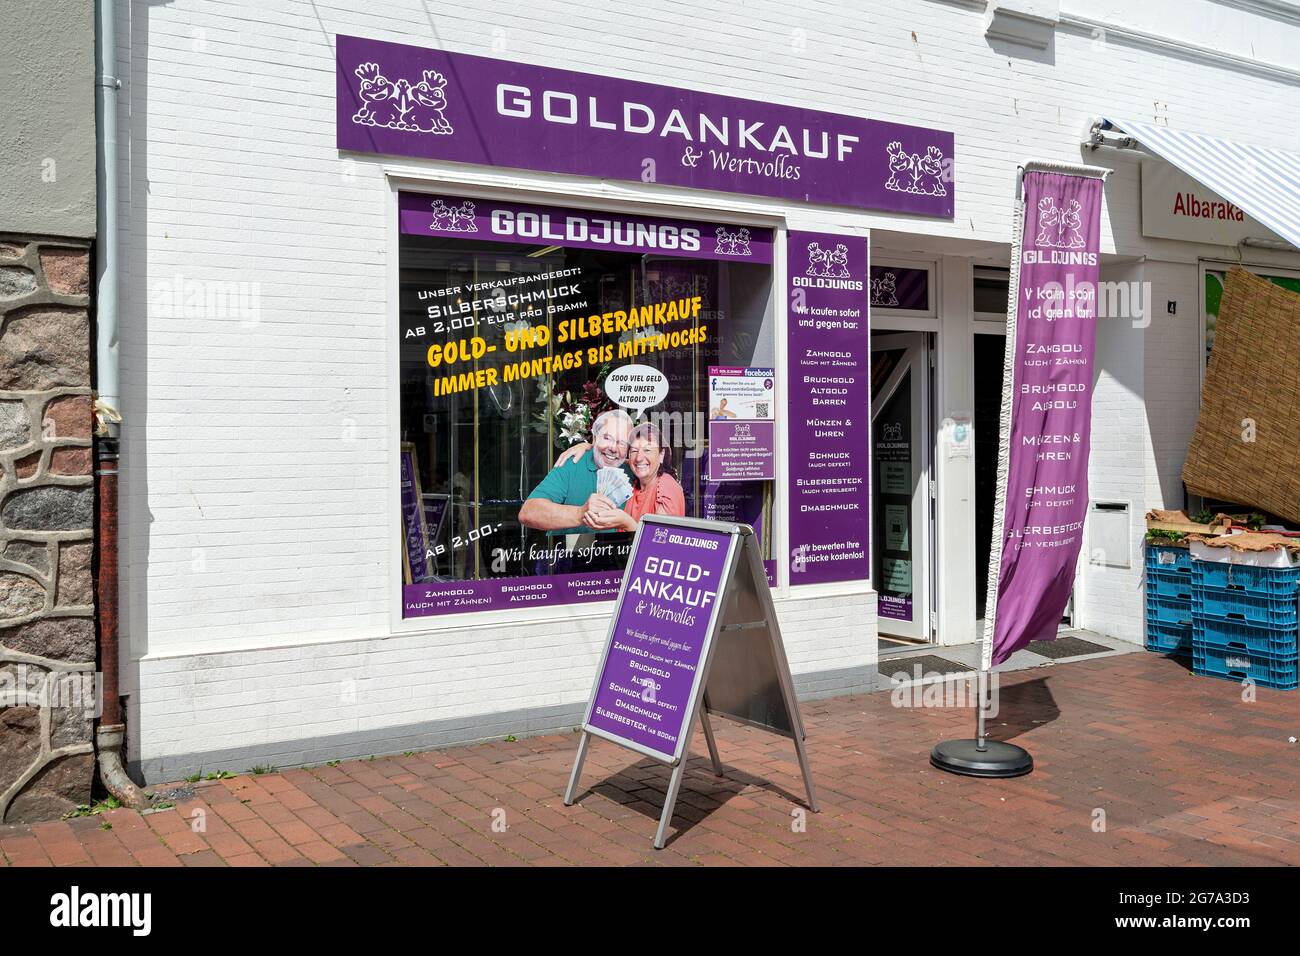 Goldjungs gold buyers in Schleswig, Germany Stock Photo